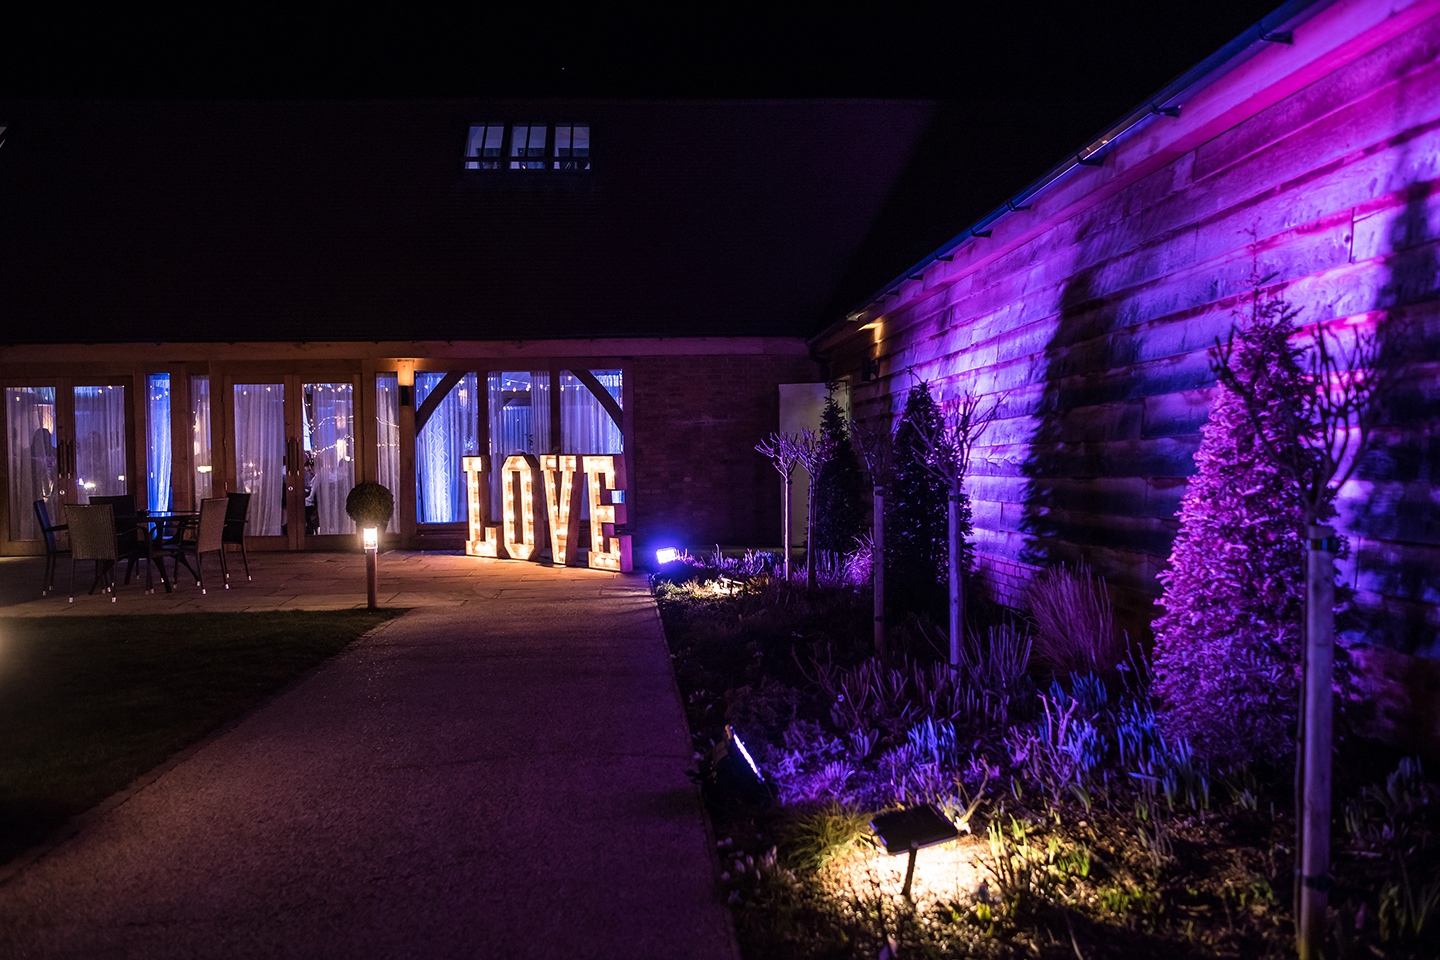 Giant love letters light up the gardens at Bassmead Manor Barns during a tasting event